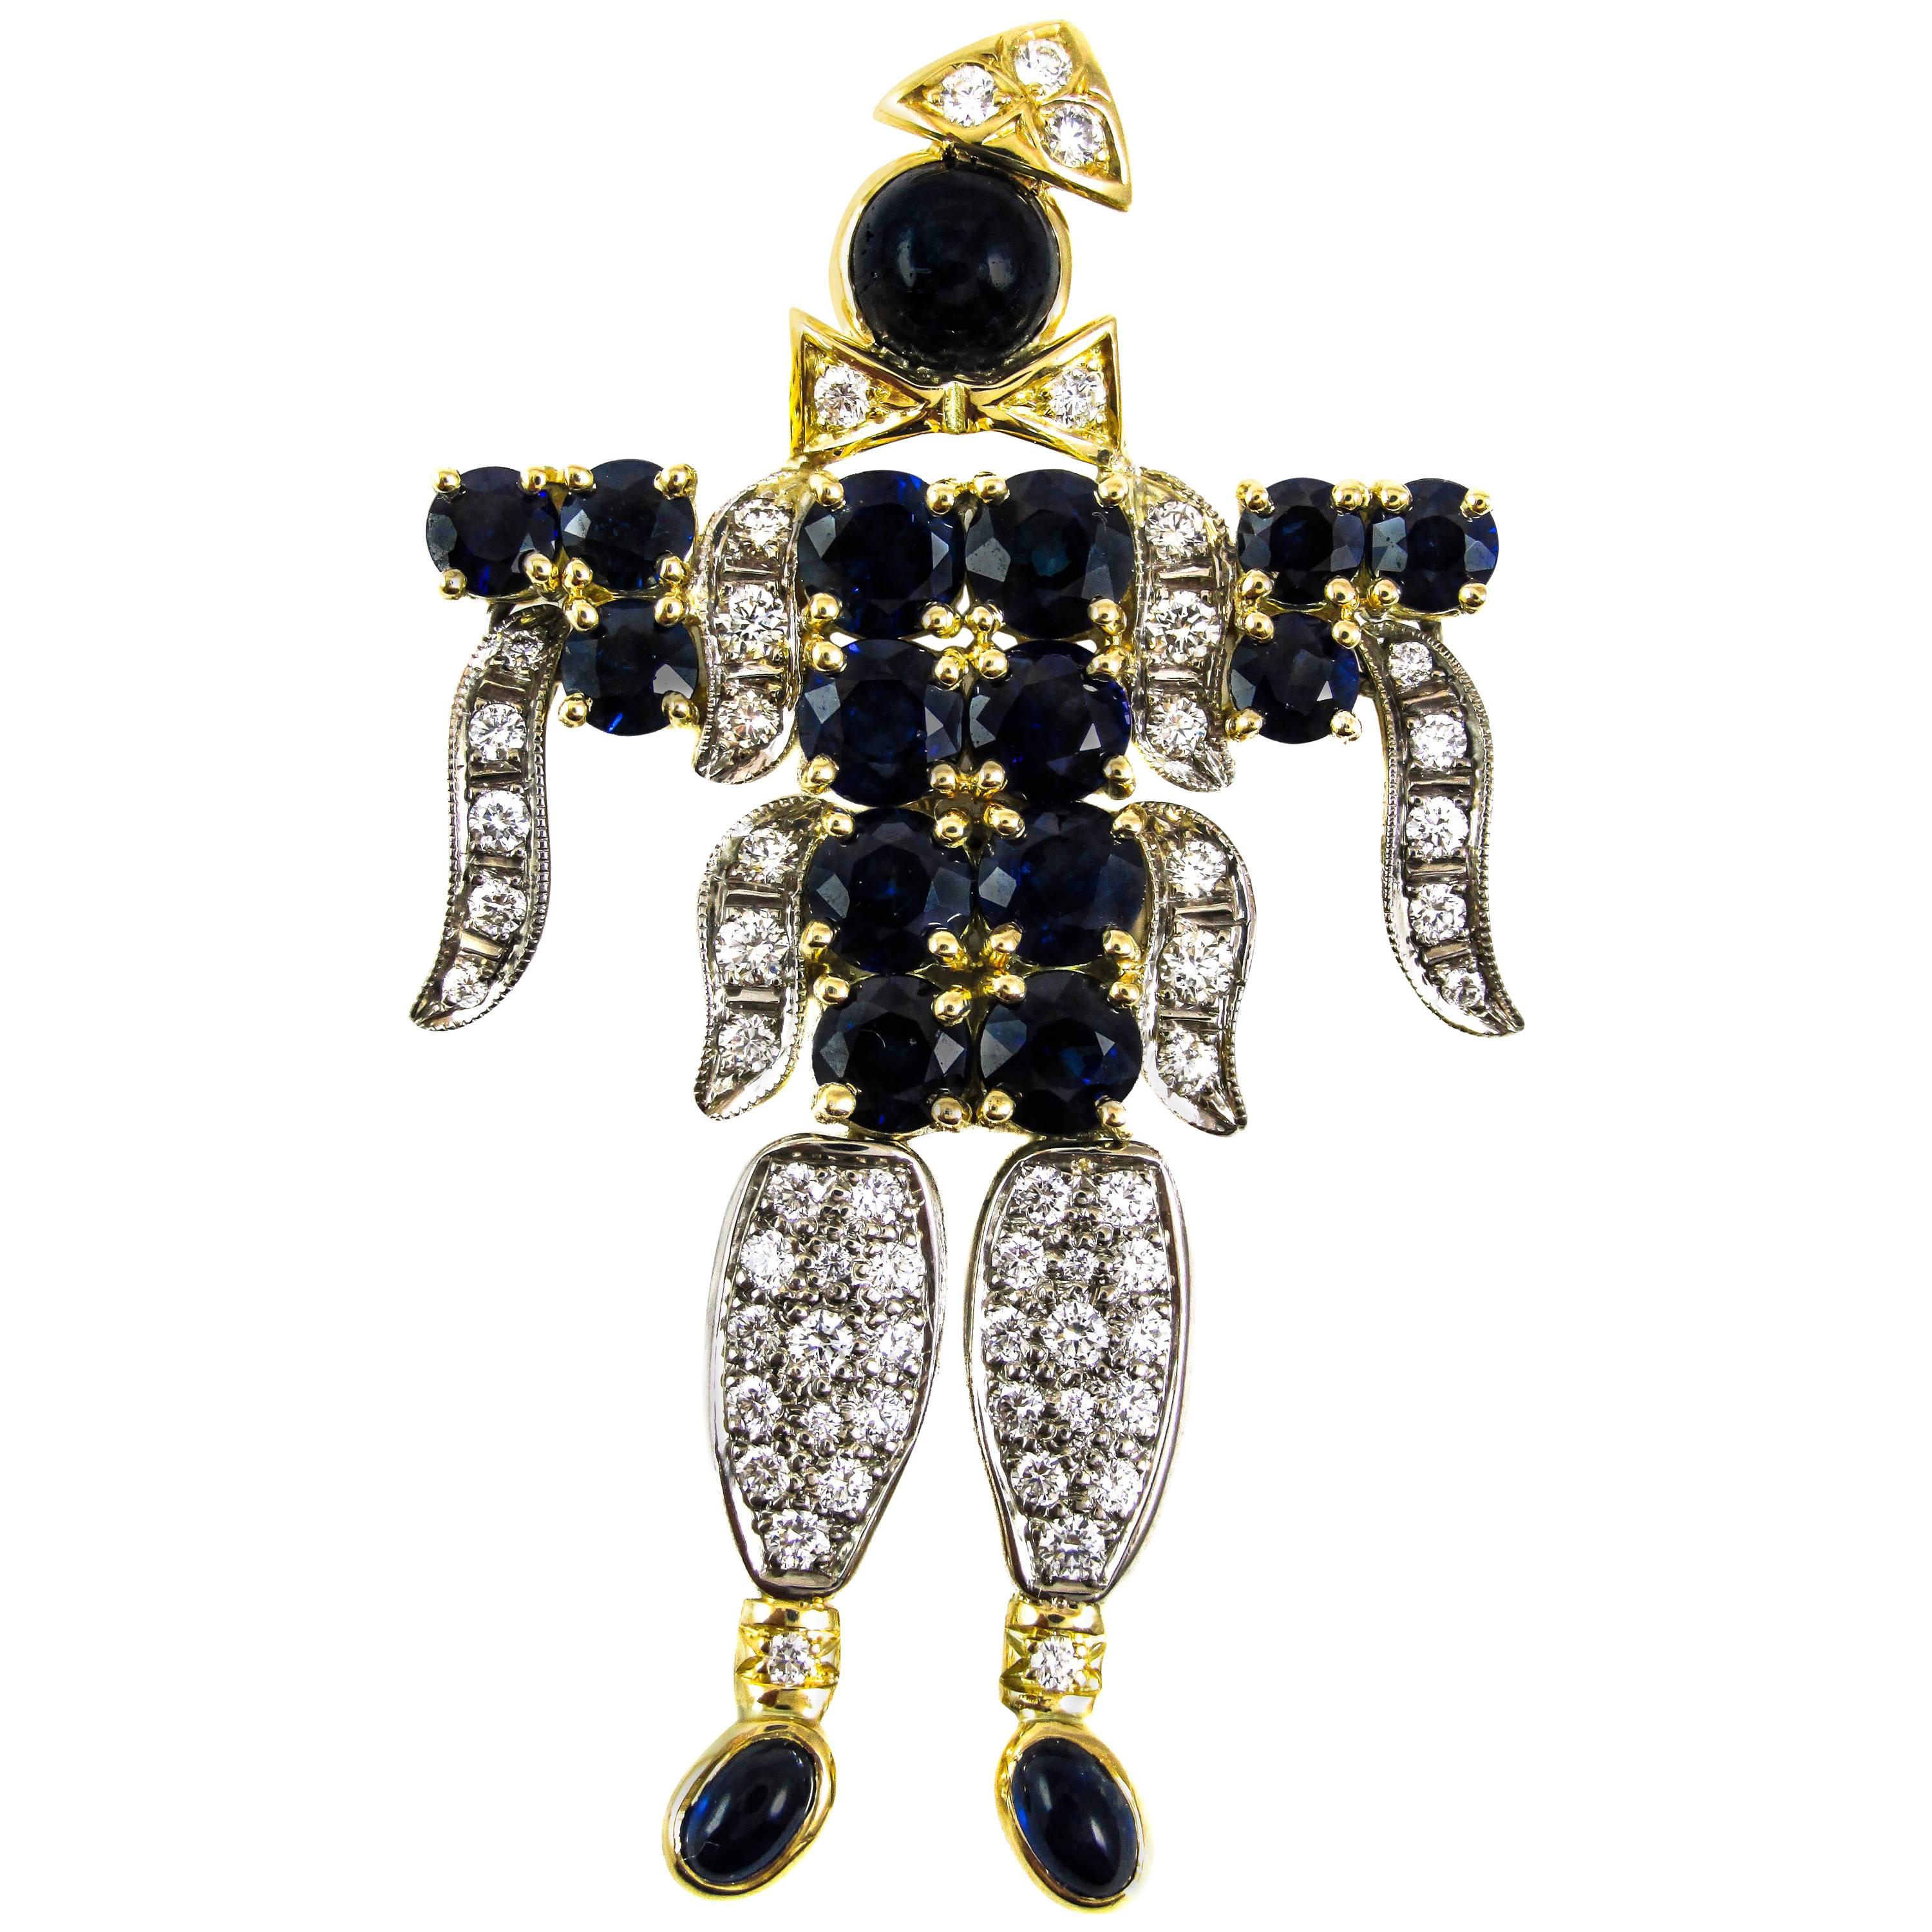 In addition to its extraordinary collection of antique, estate, and fine jewelry, Rive Gauche Jewelry offers unique custom-designed creations you can only find here. Handcrafted by the finest jewelers, these pieces are only available in limited